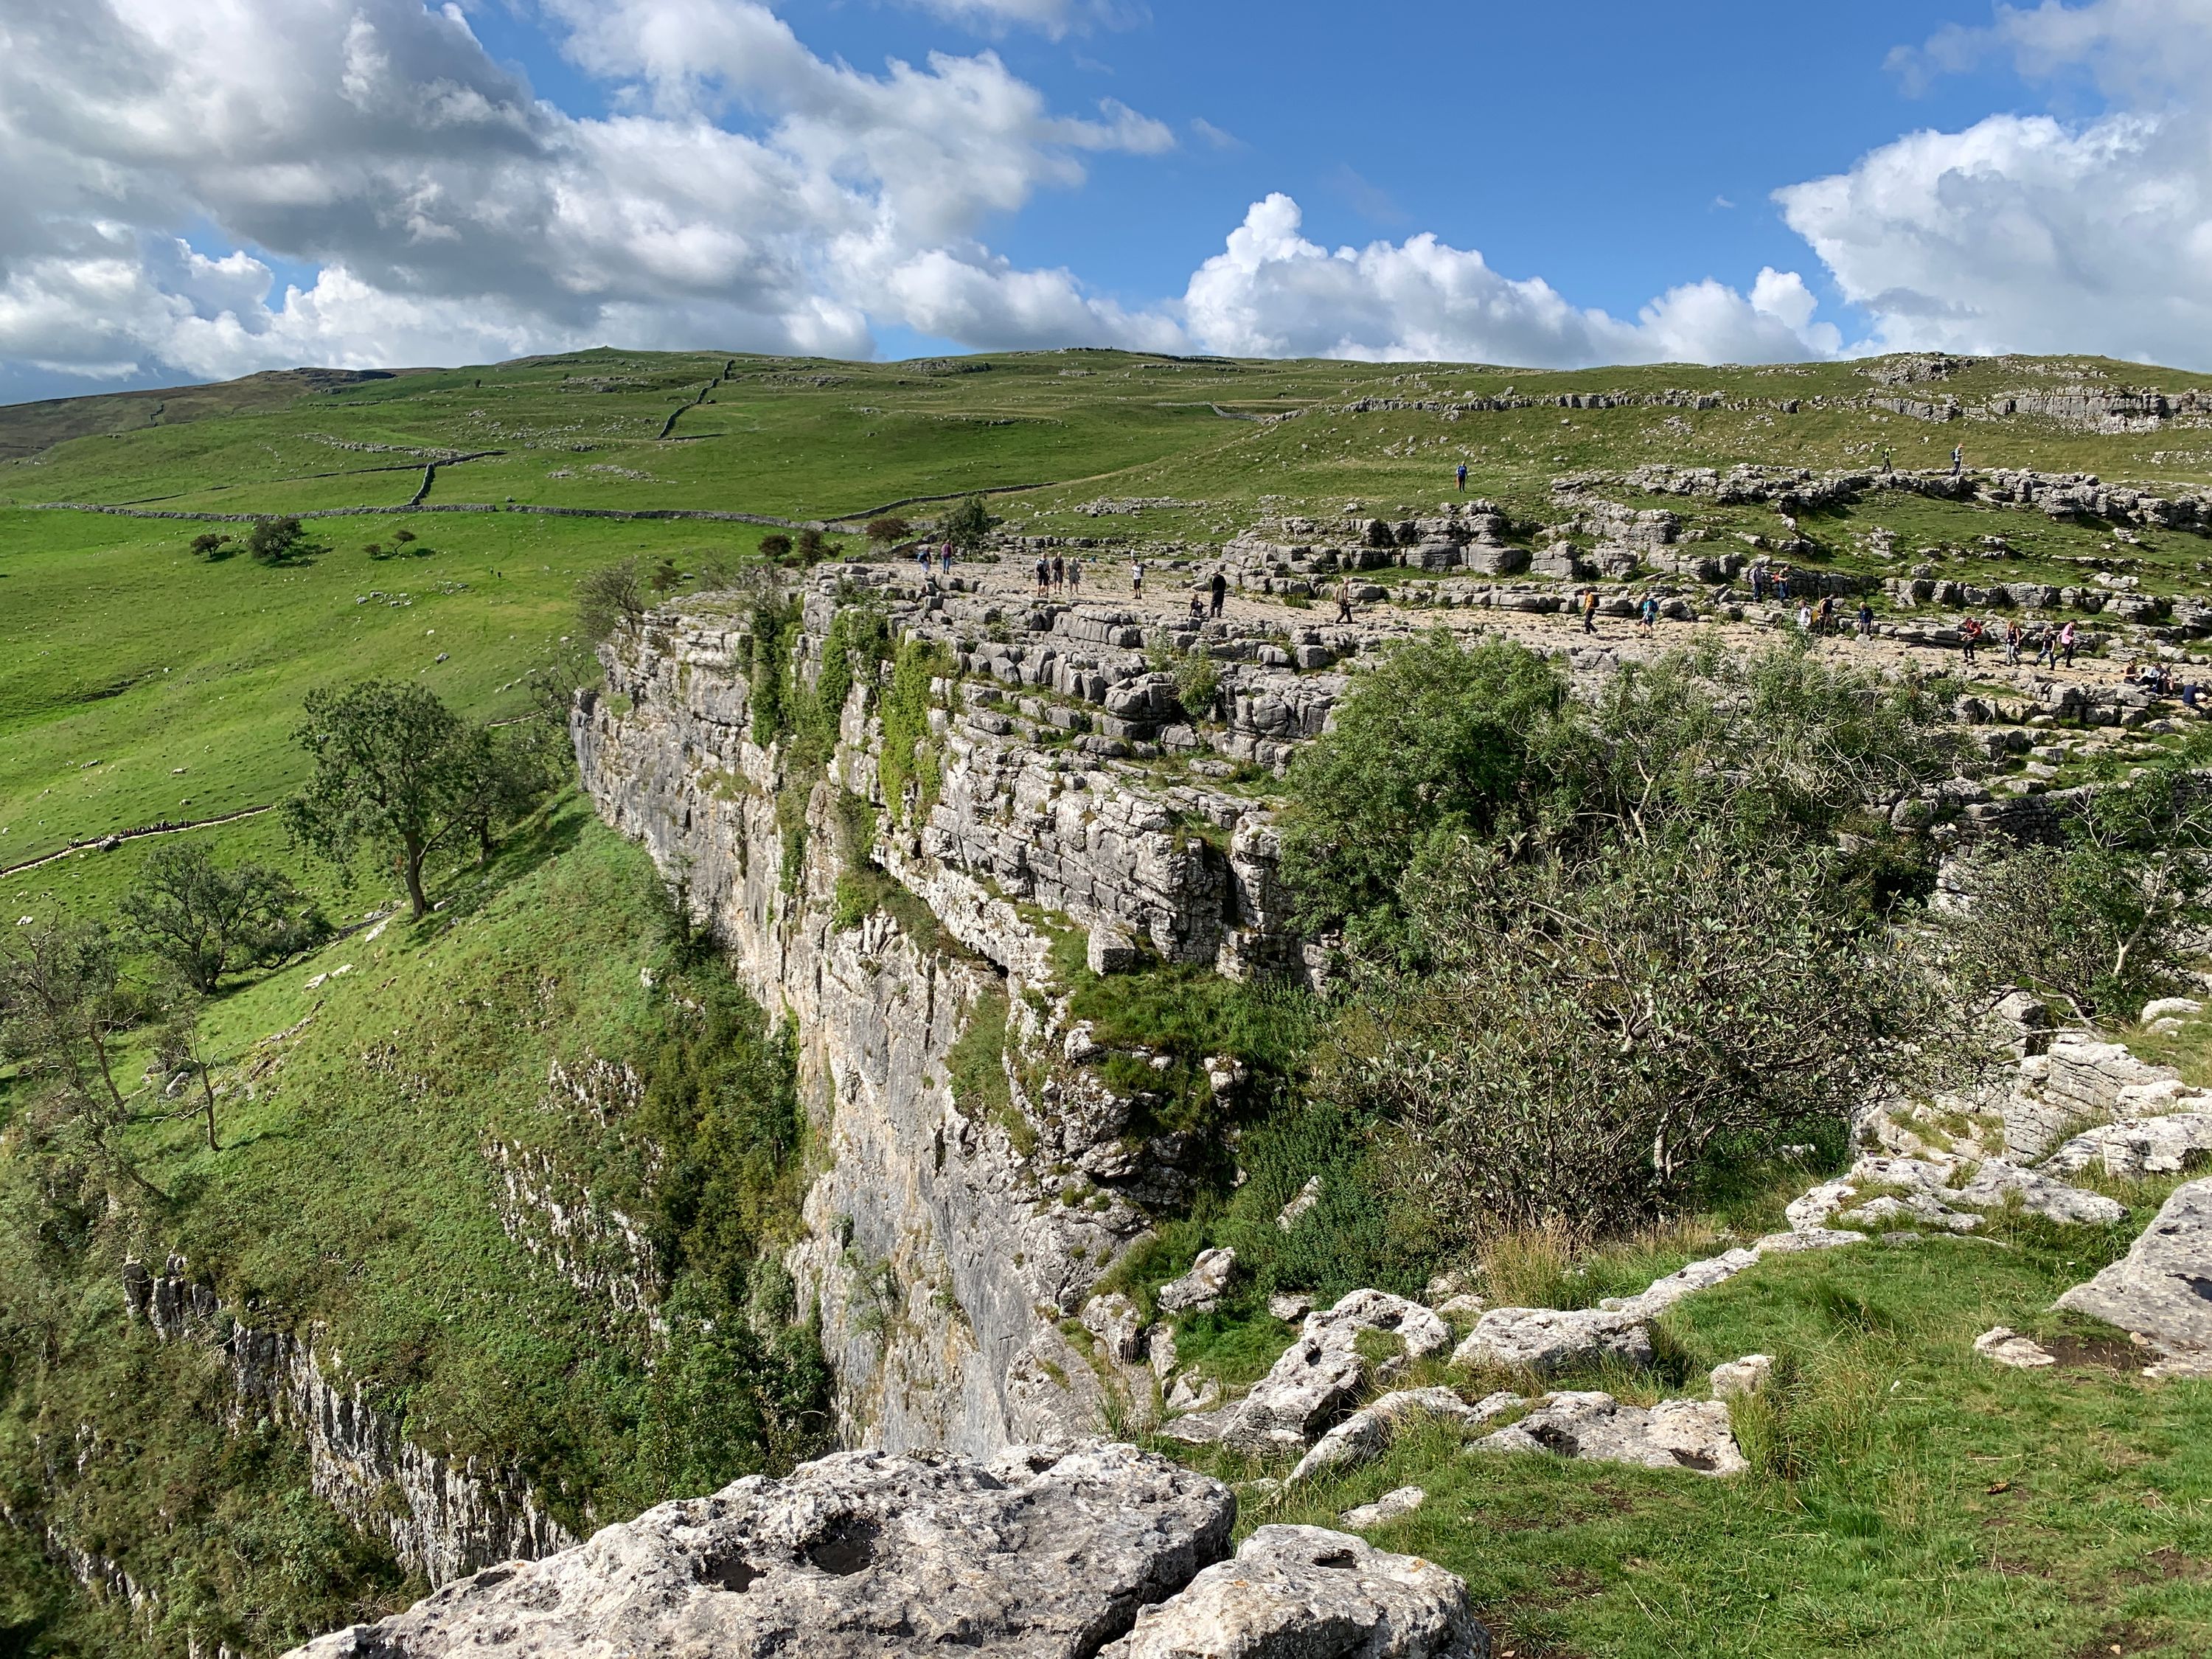 Other side of Malham Cove from the top